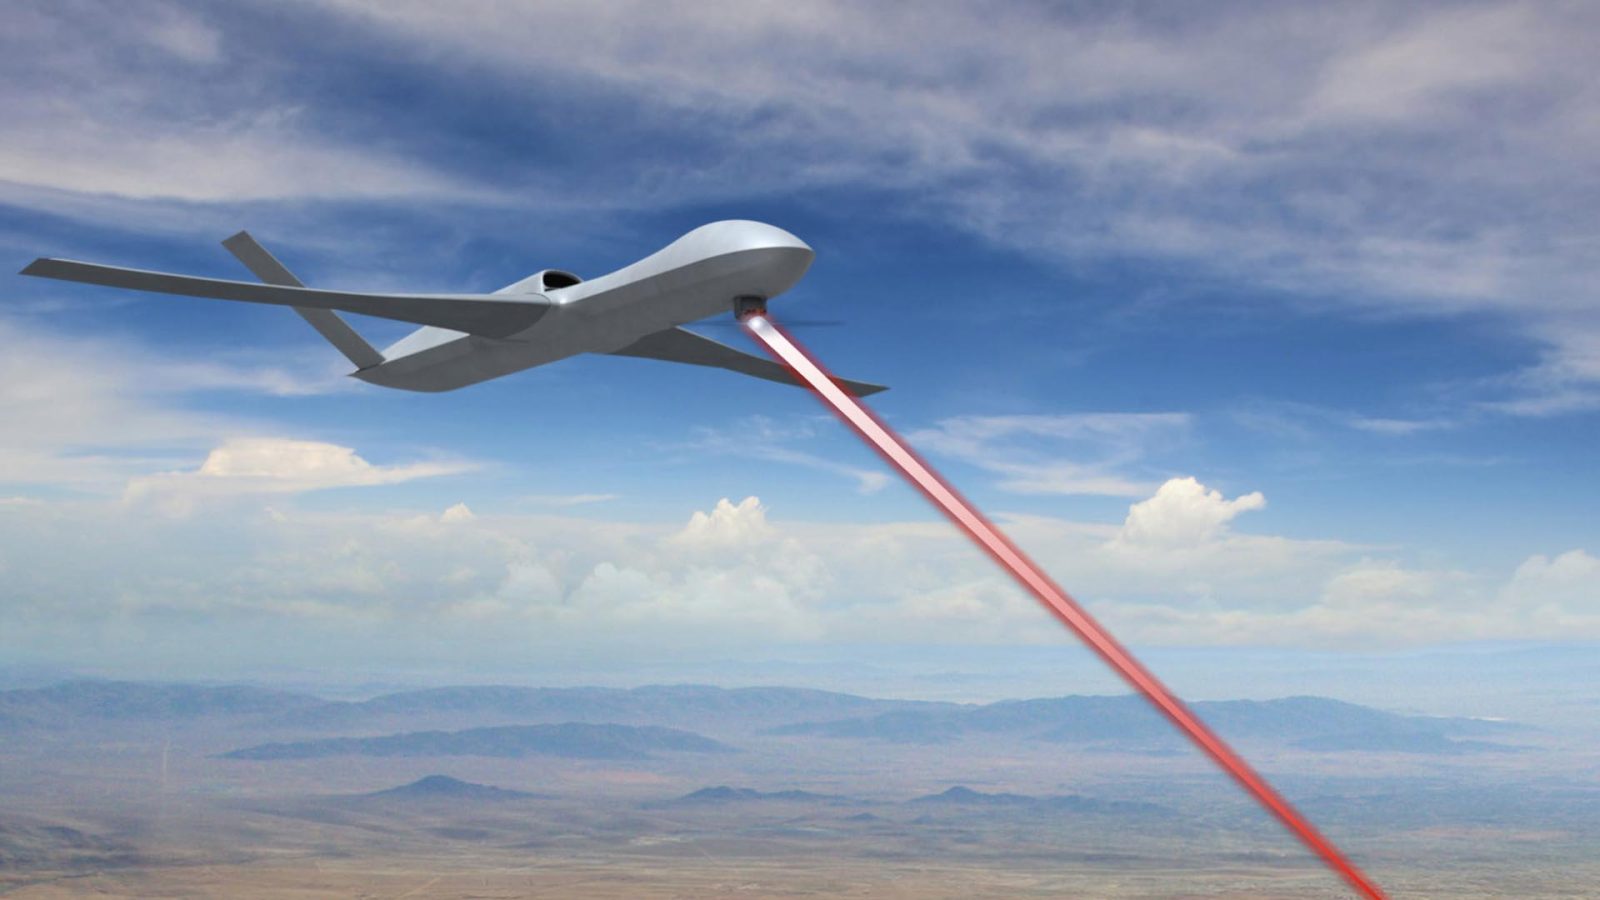 The United States Army wants to power drones with lasers, keeping them in the air indefinitely